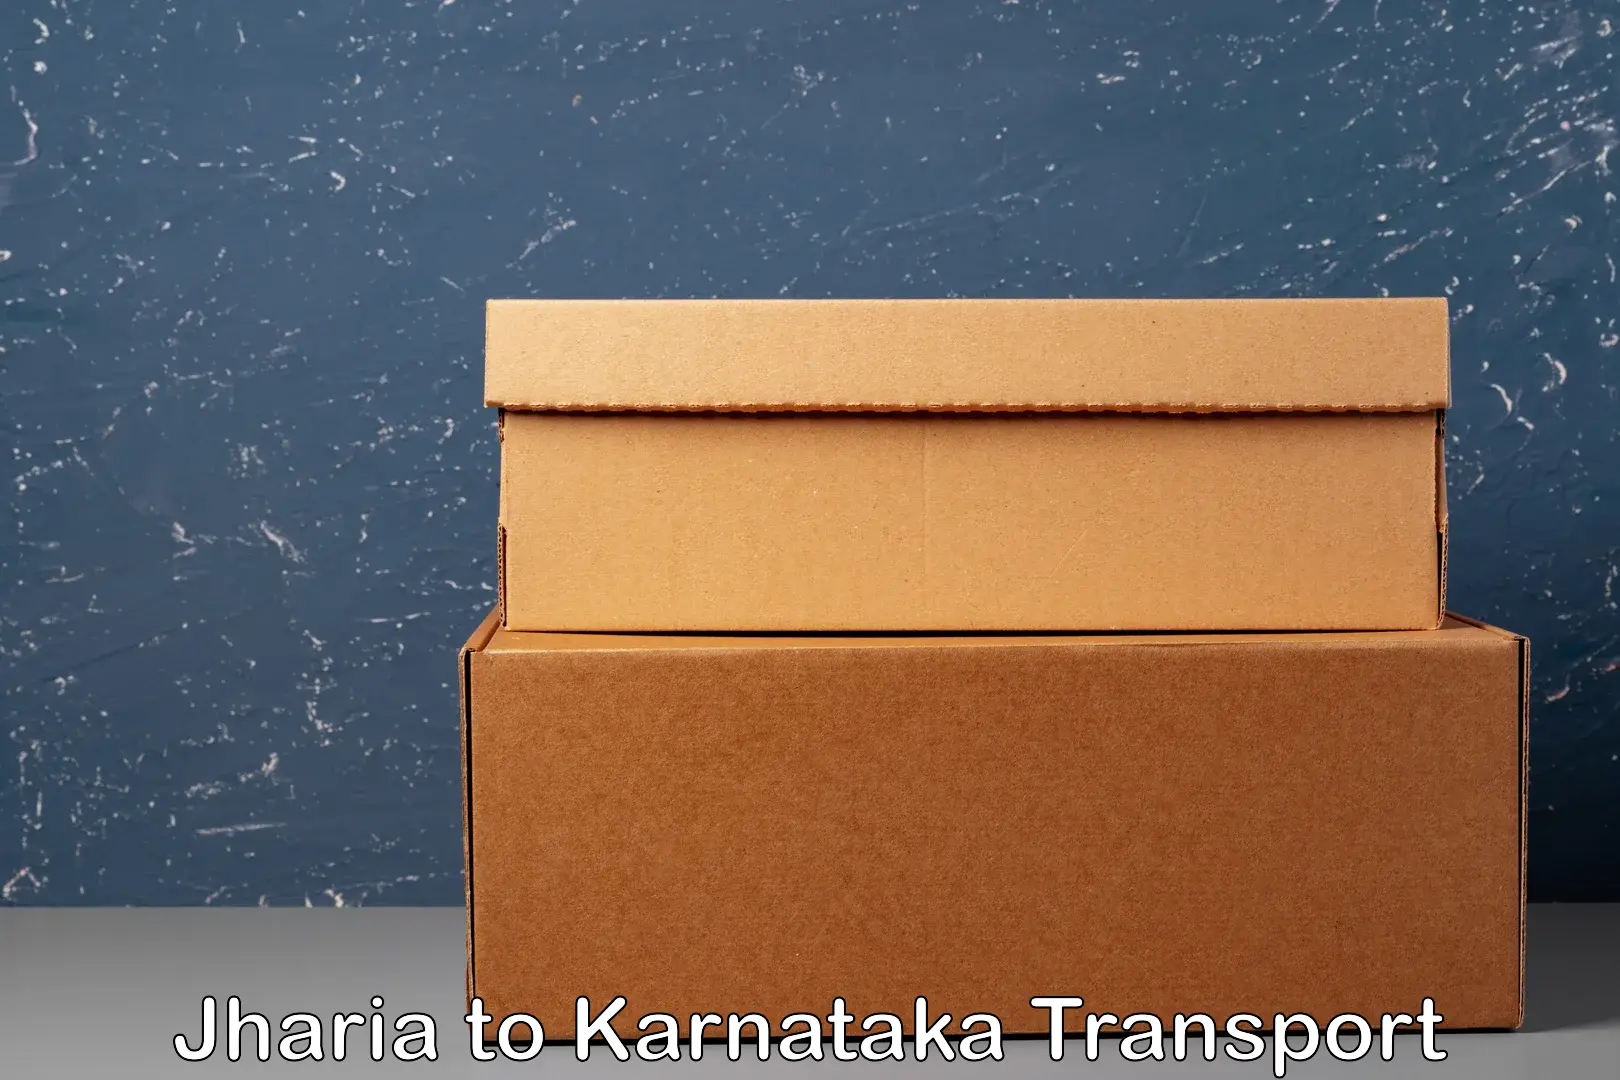 Two wheeler parcel service in Jharia to Mudhol